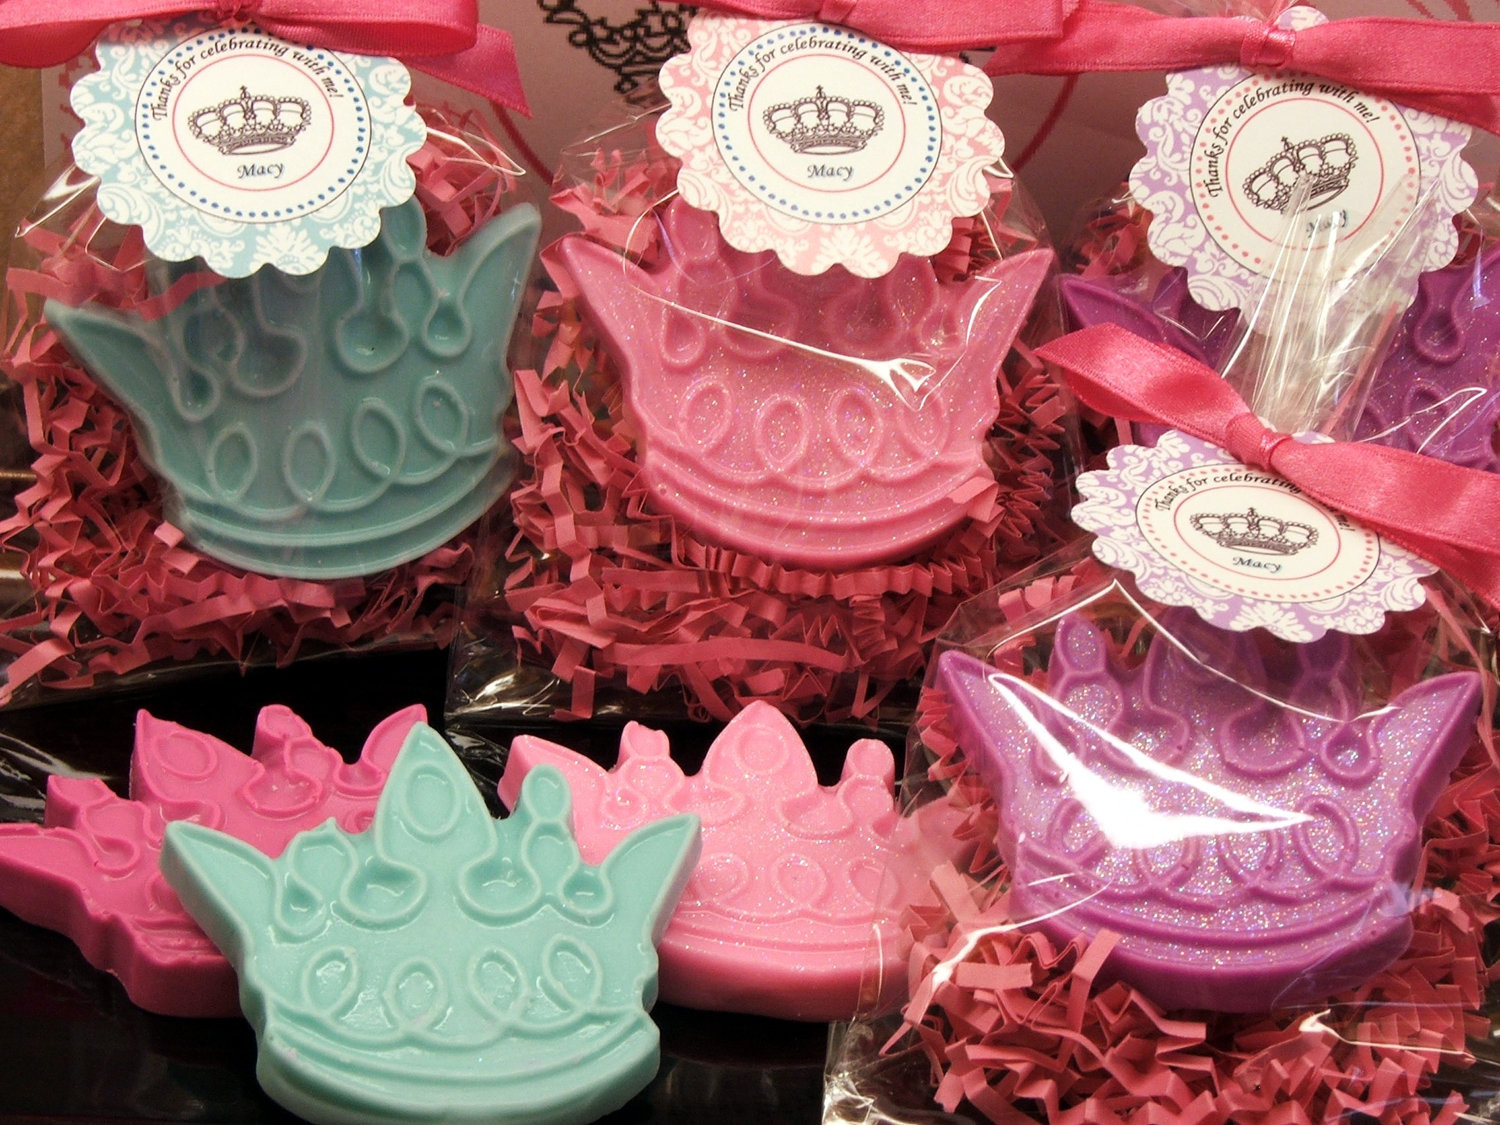 Party Favor Baby
 Set of 10 Tiara Crown Soap Party Favor Baby Shower Princess